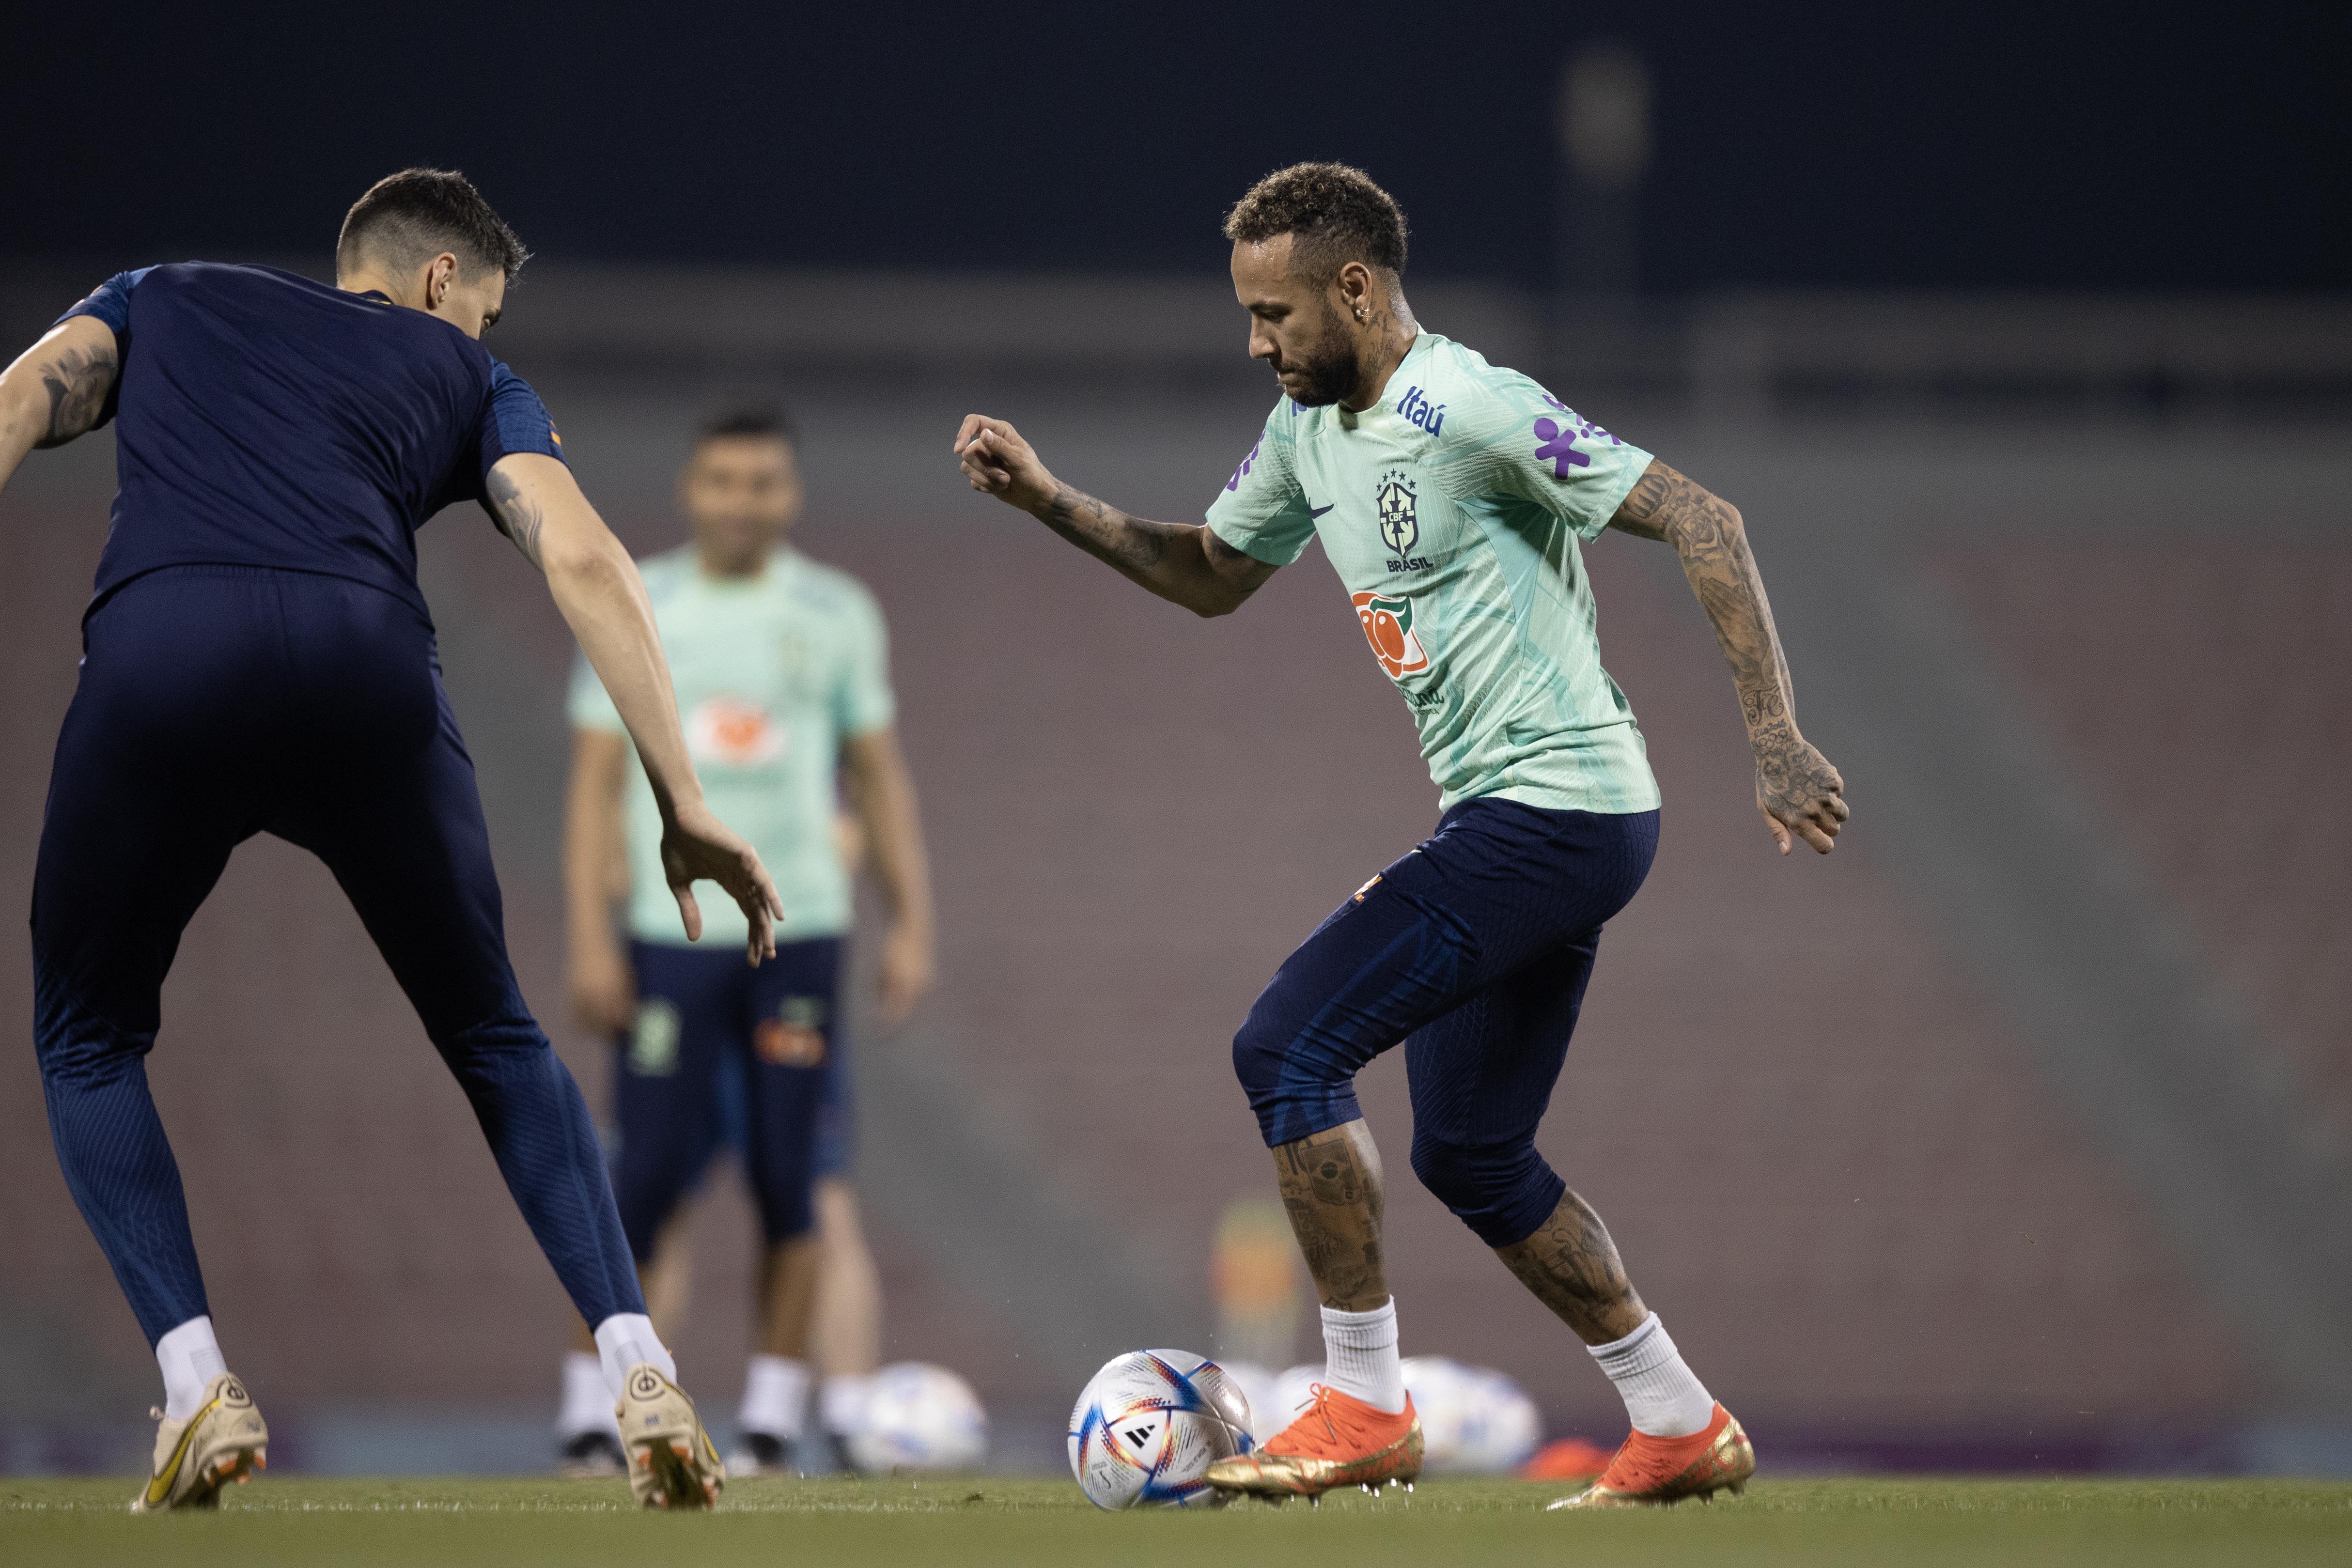 Neymar Jr is back training with the ball before the match against